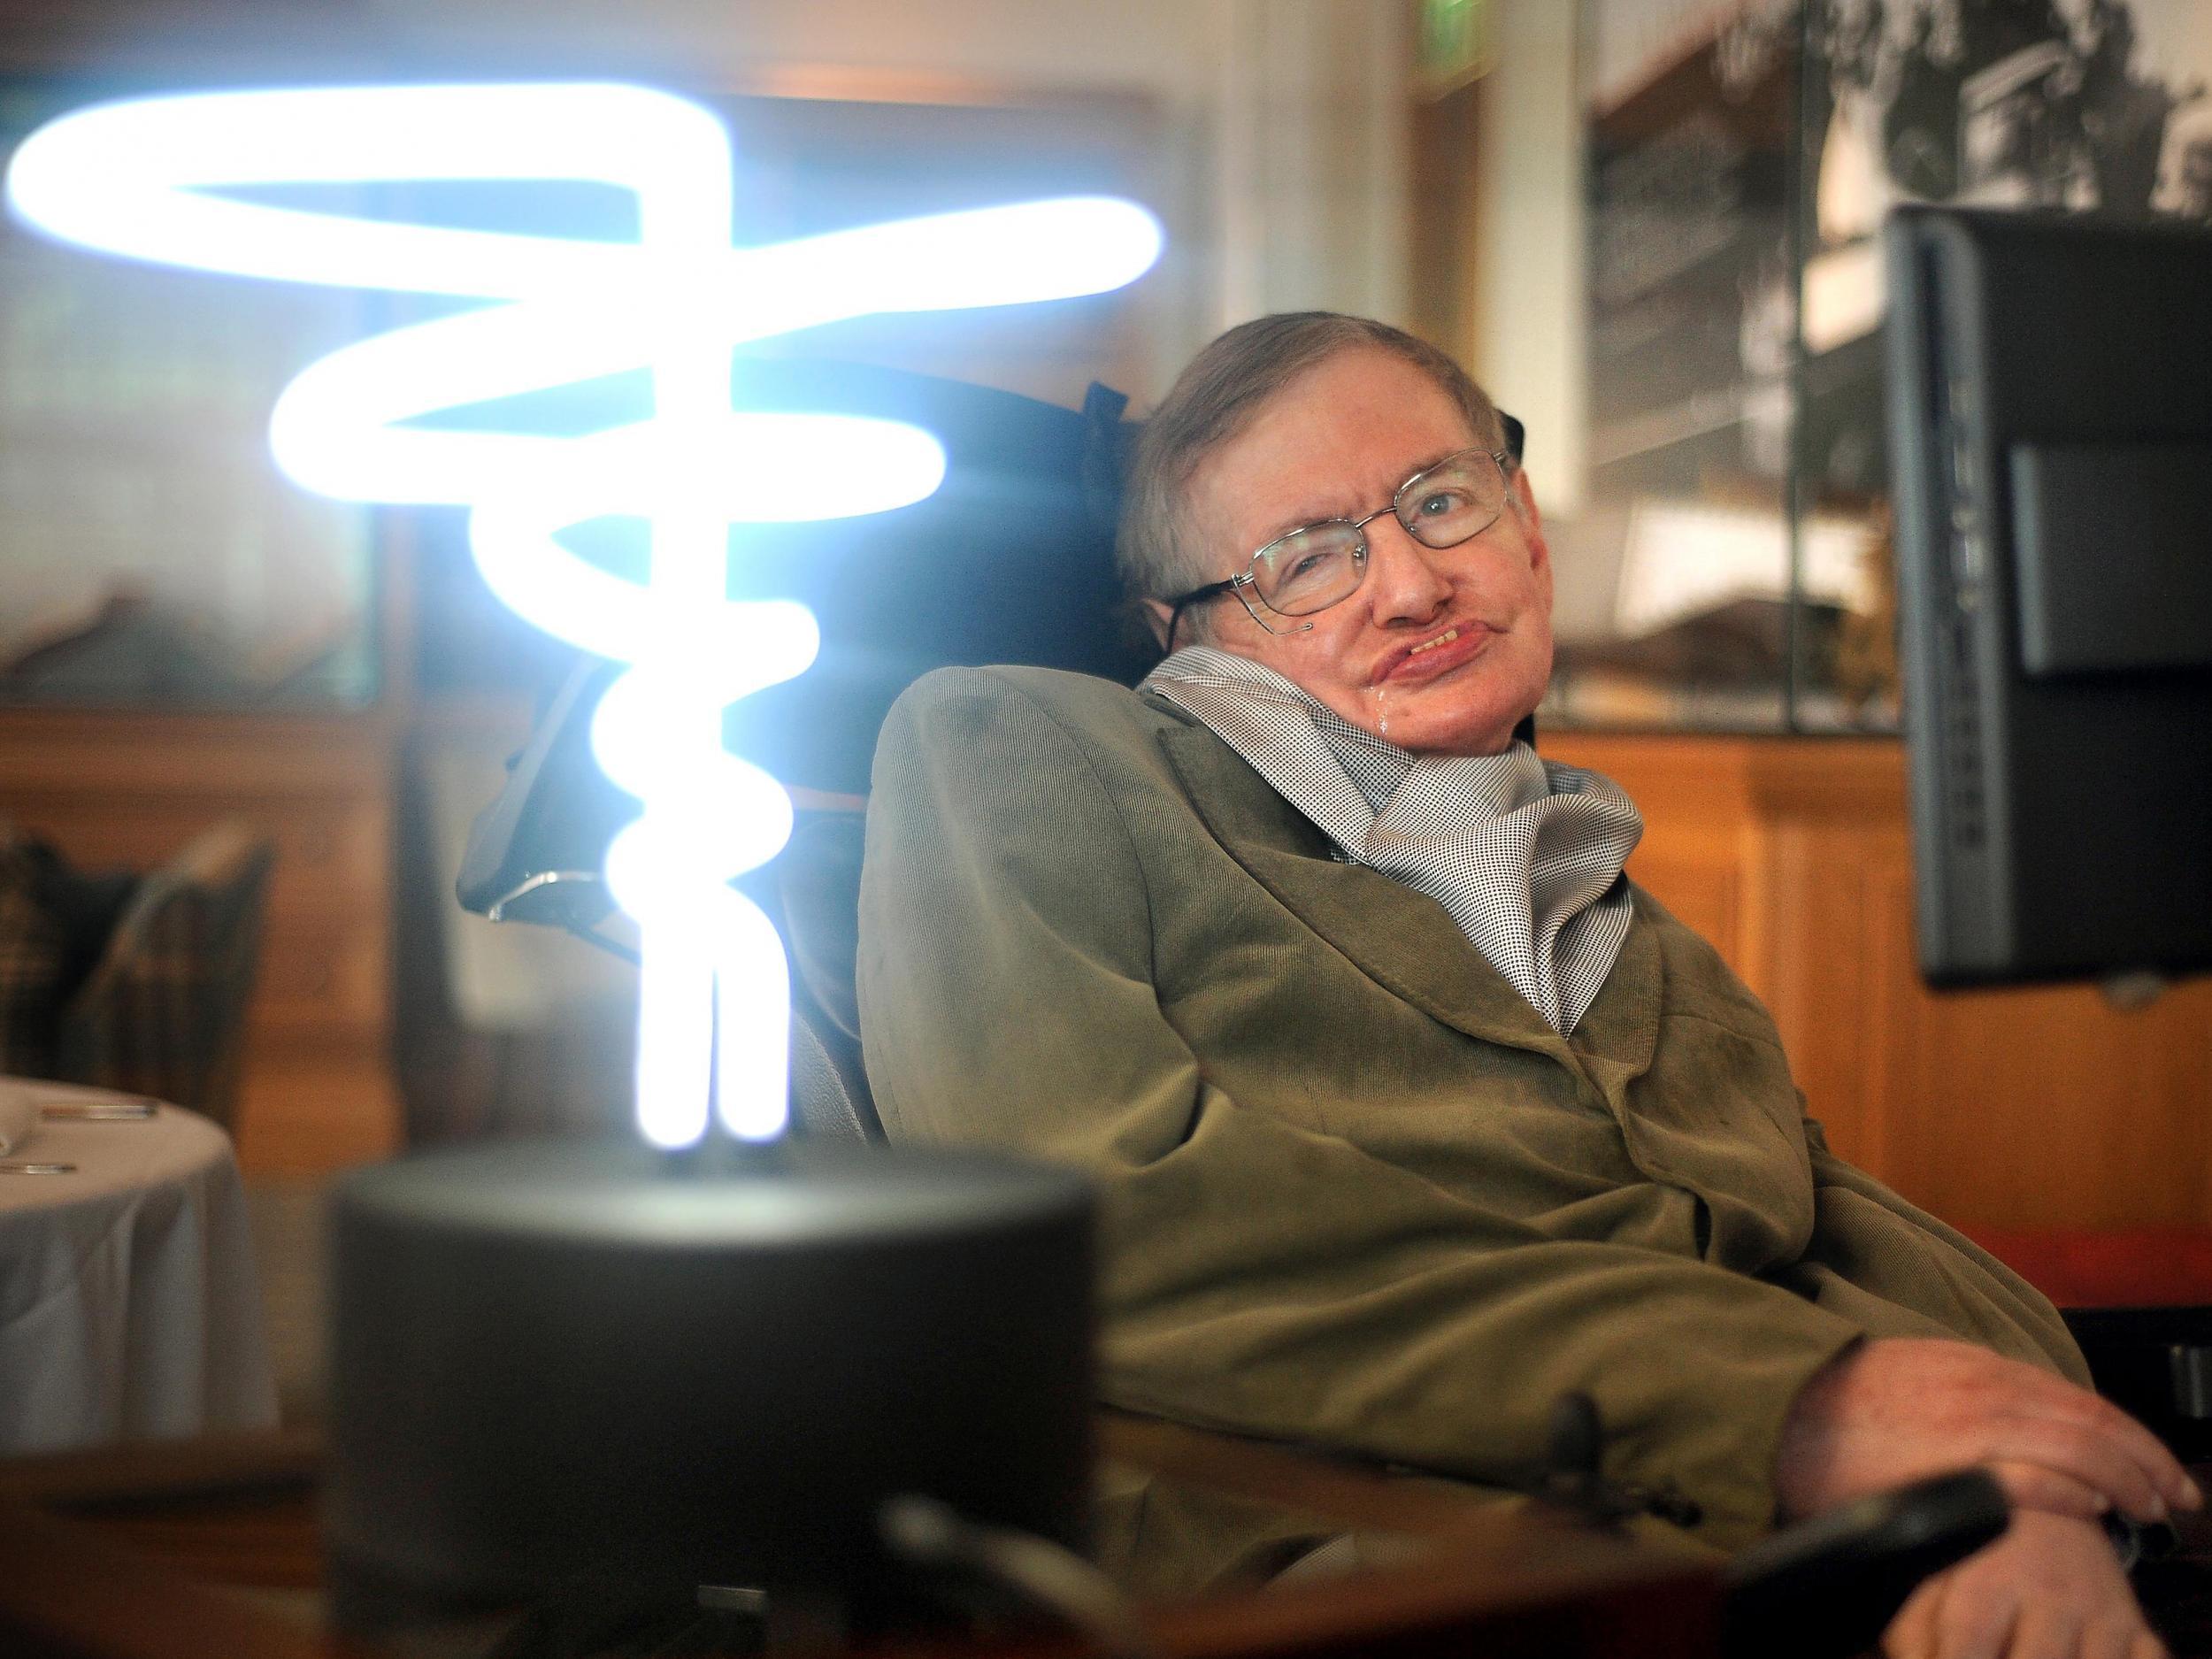 Professor Hawking posing beside a lamp titled 'black hole light' by inventor Mark Champkins, presented to him during a visit to London's Science Museum in 2012